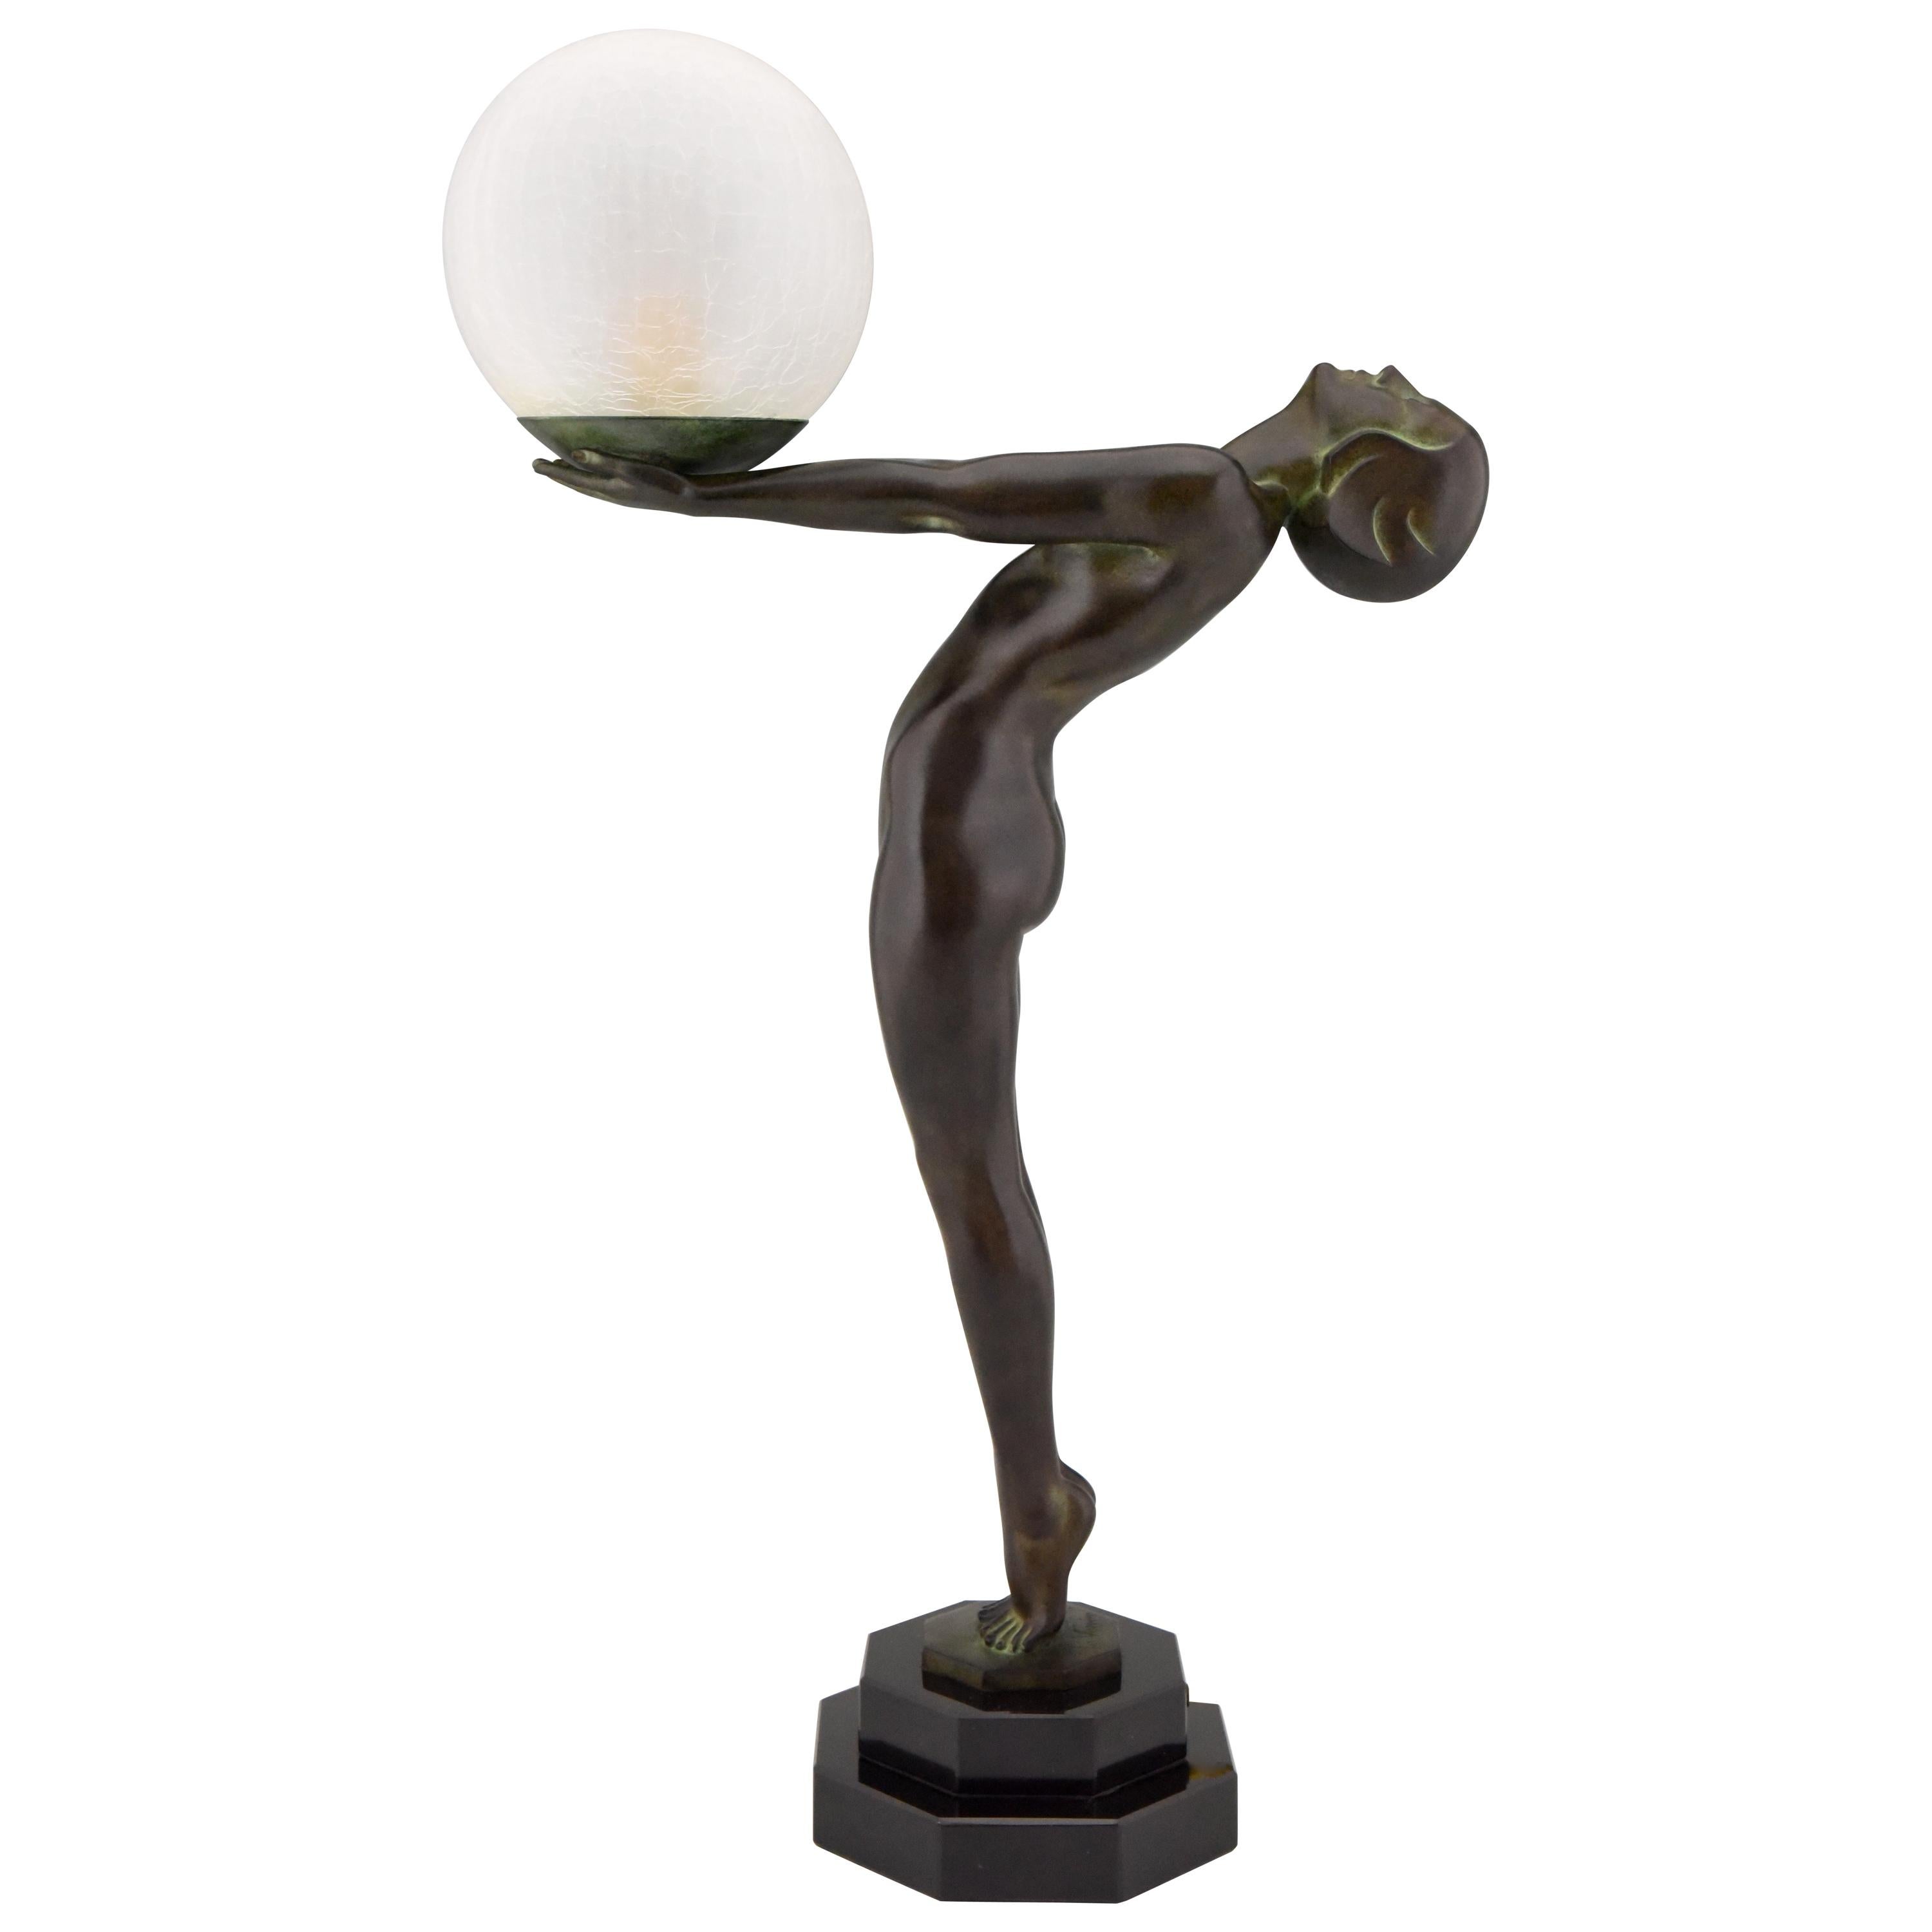 Impressive pair of Art Deco figural table lamps of a standing nude holding a glass shade, Lumina.
H. 65 cm or 25.6 inch tall.
Designed by Max Le Verrier in France, 1928.
Original posthumous contemporary cast at the Le Verrier foundry. 
Handcrafted.